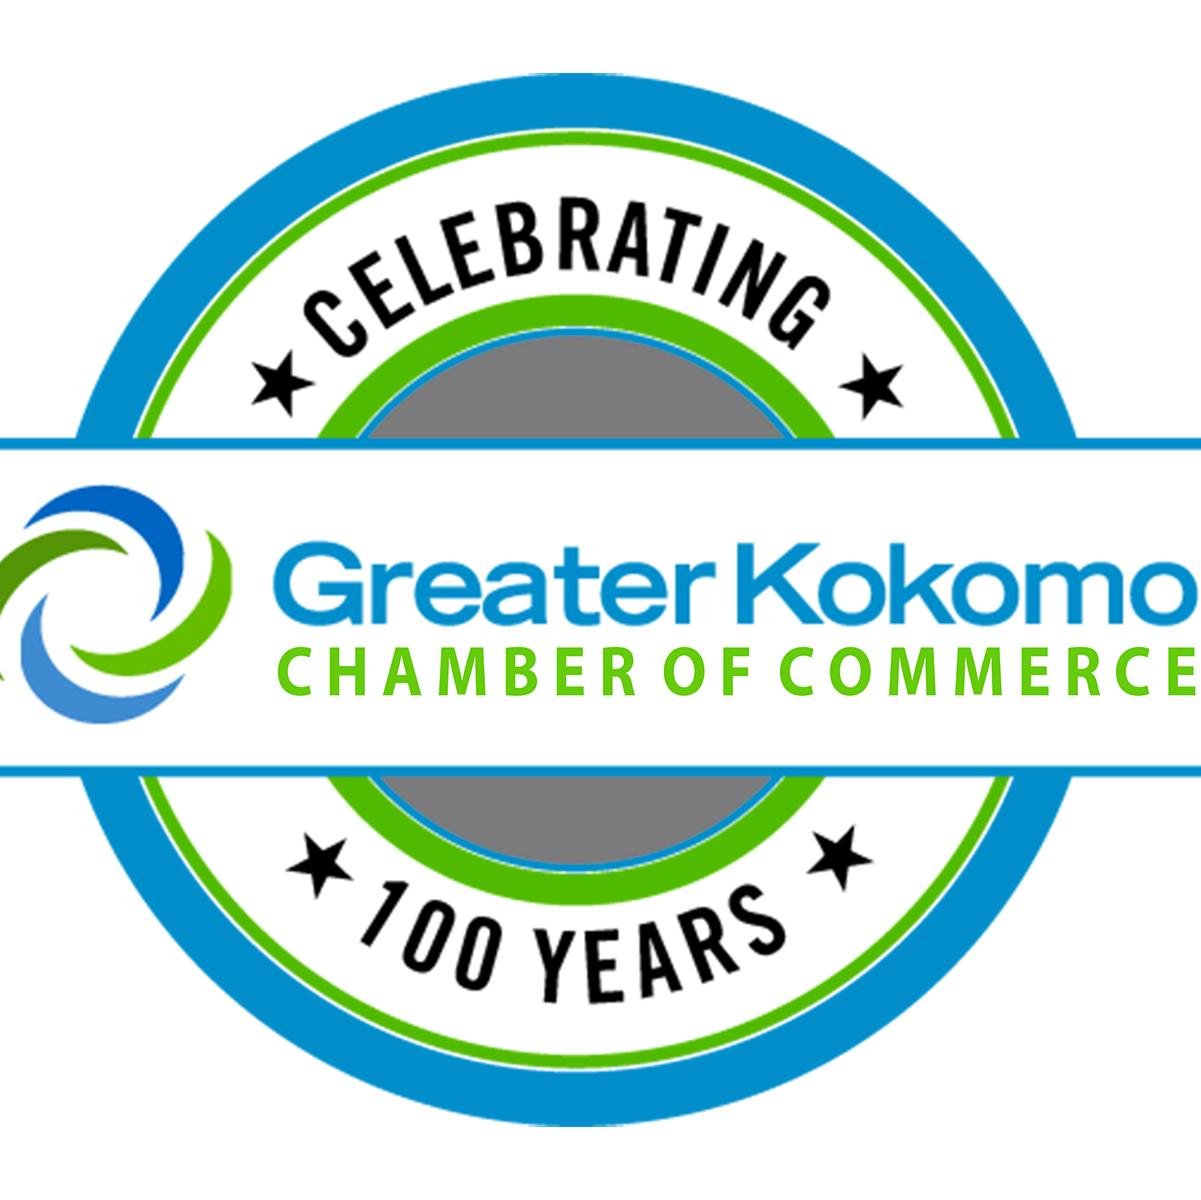 Working to build economic vitality for Kokomo & Howard County through strong relationships and unlimited resources. A division of @GreaterKokomo.